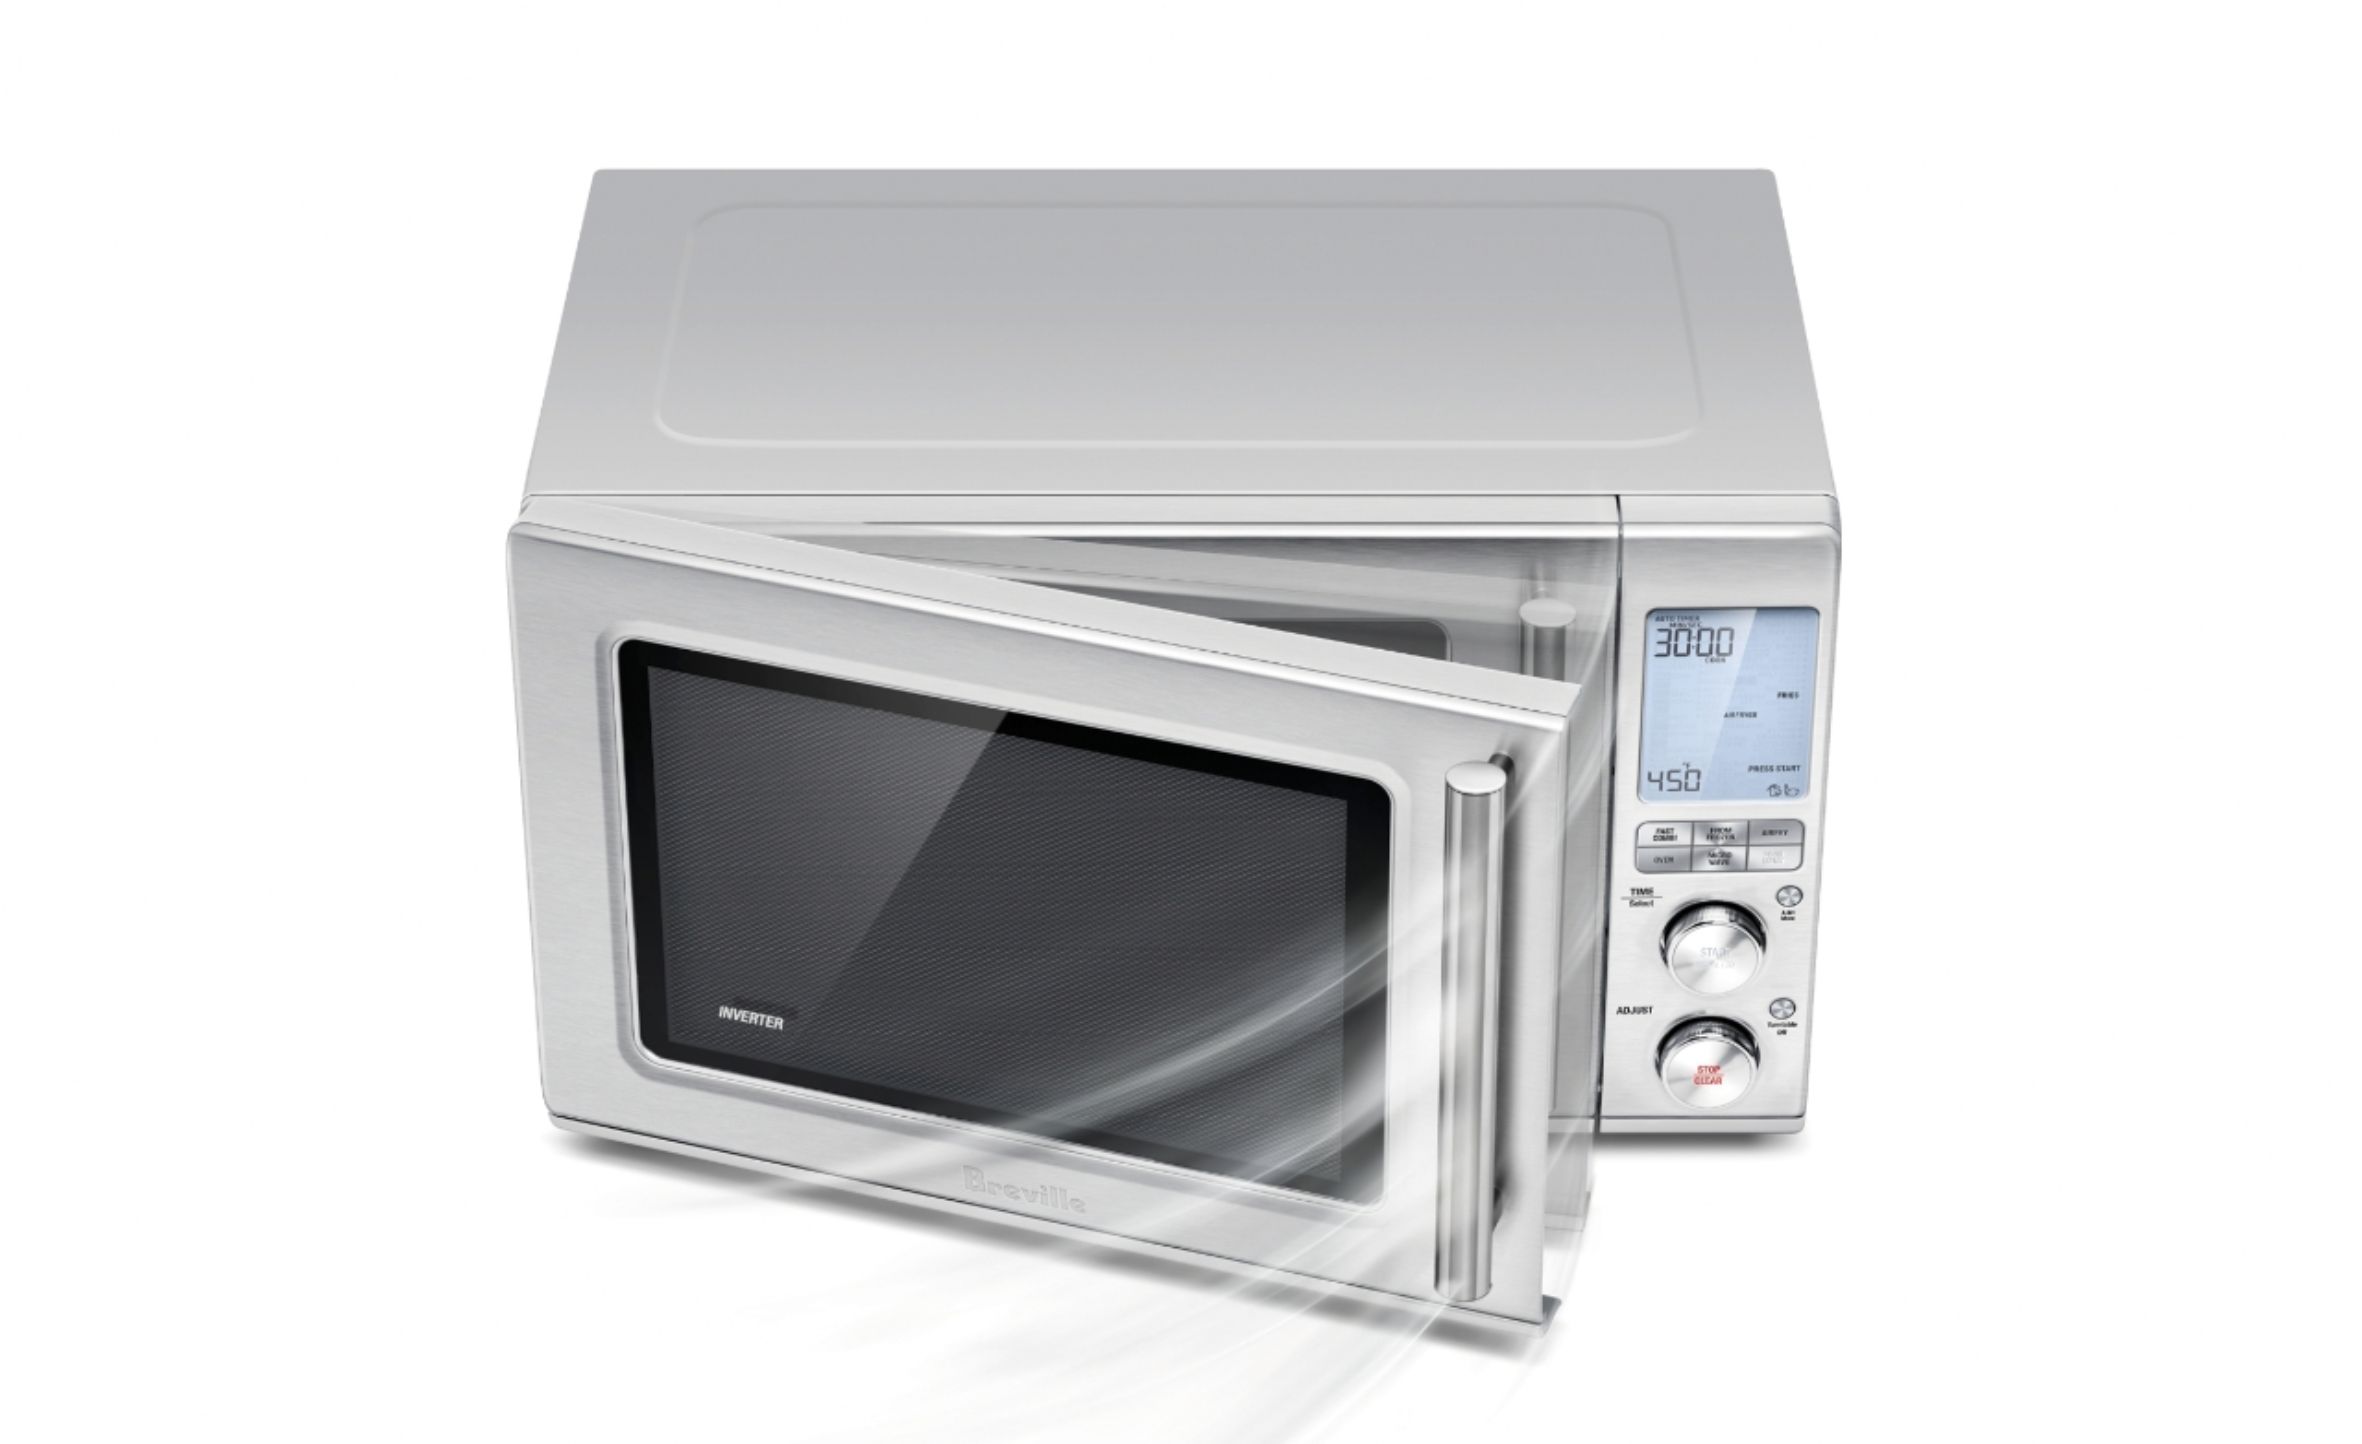 Microwave Toaster Oven Combo - Best Buy